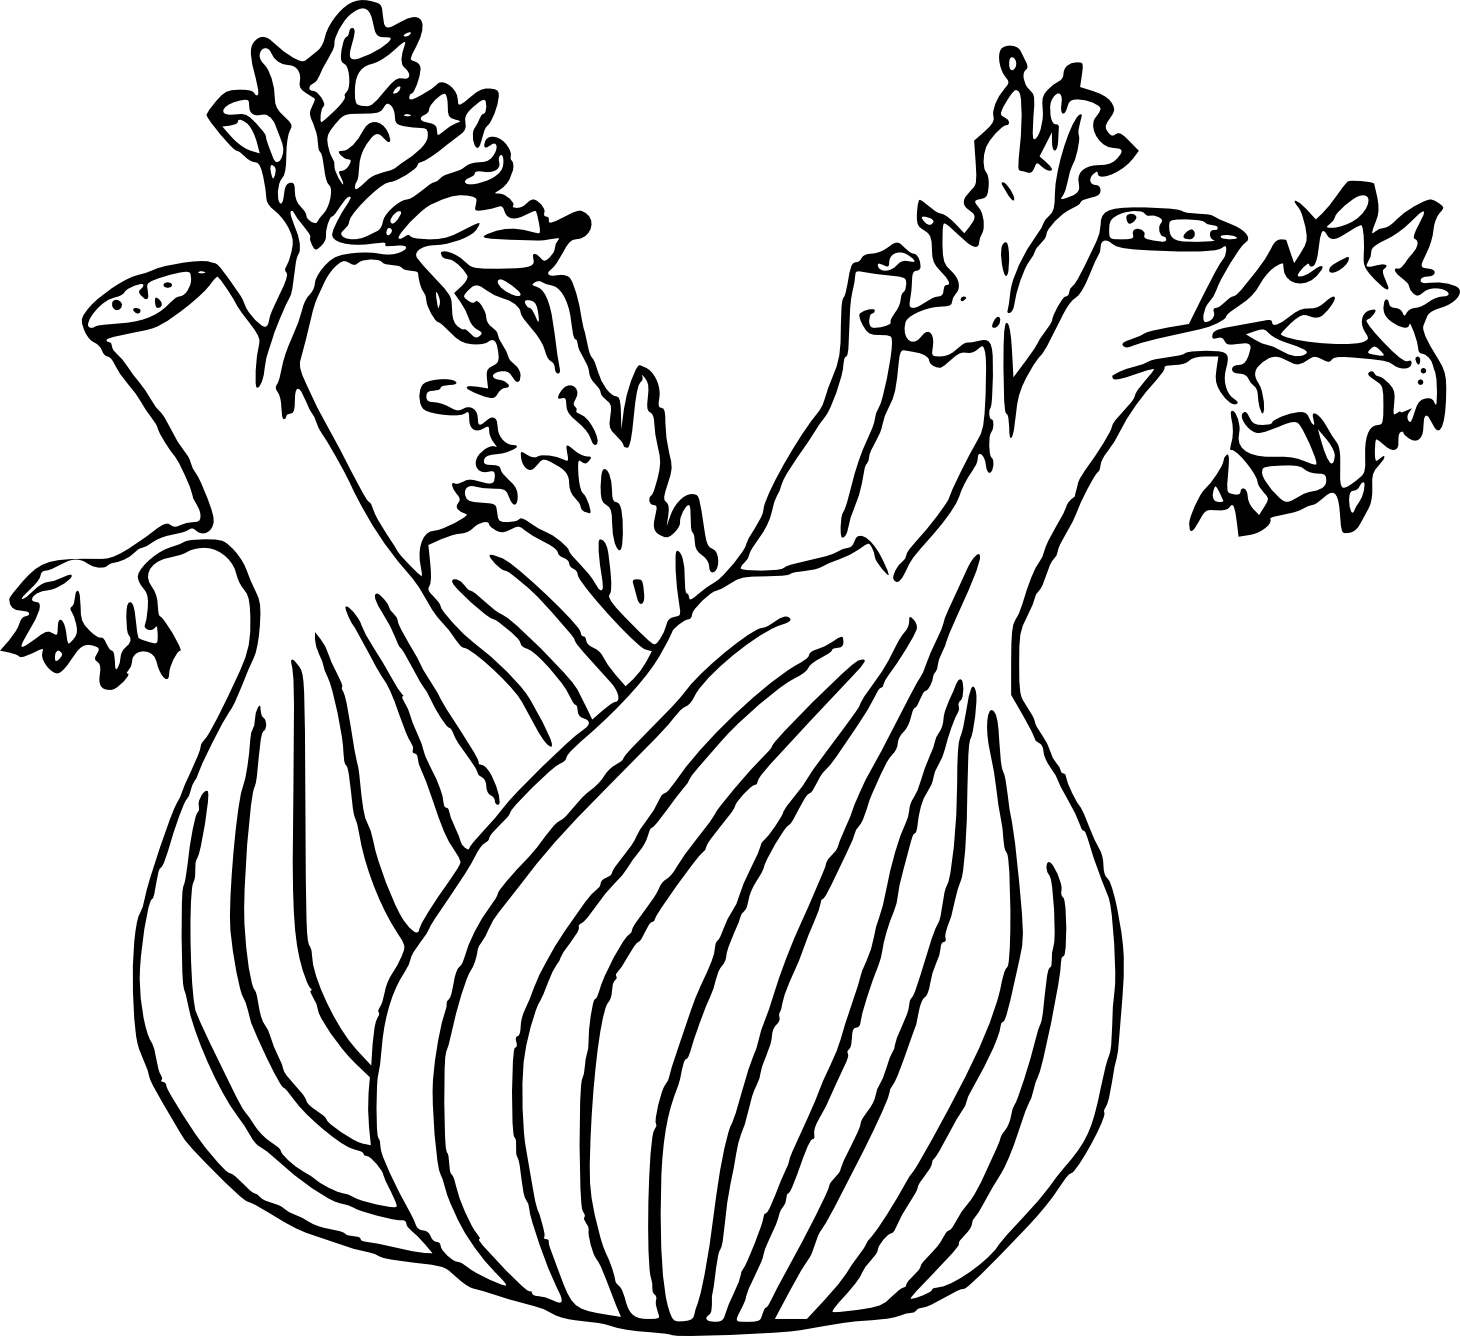 Fennel coloring page